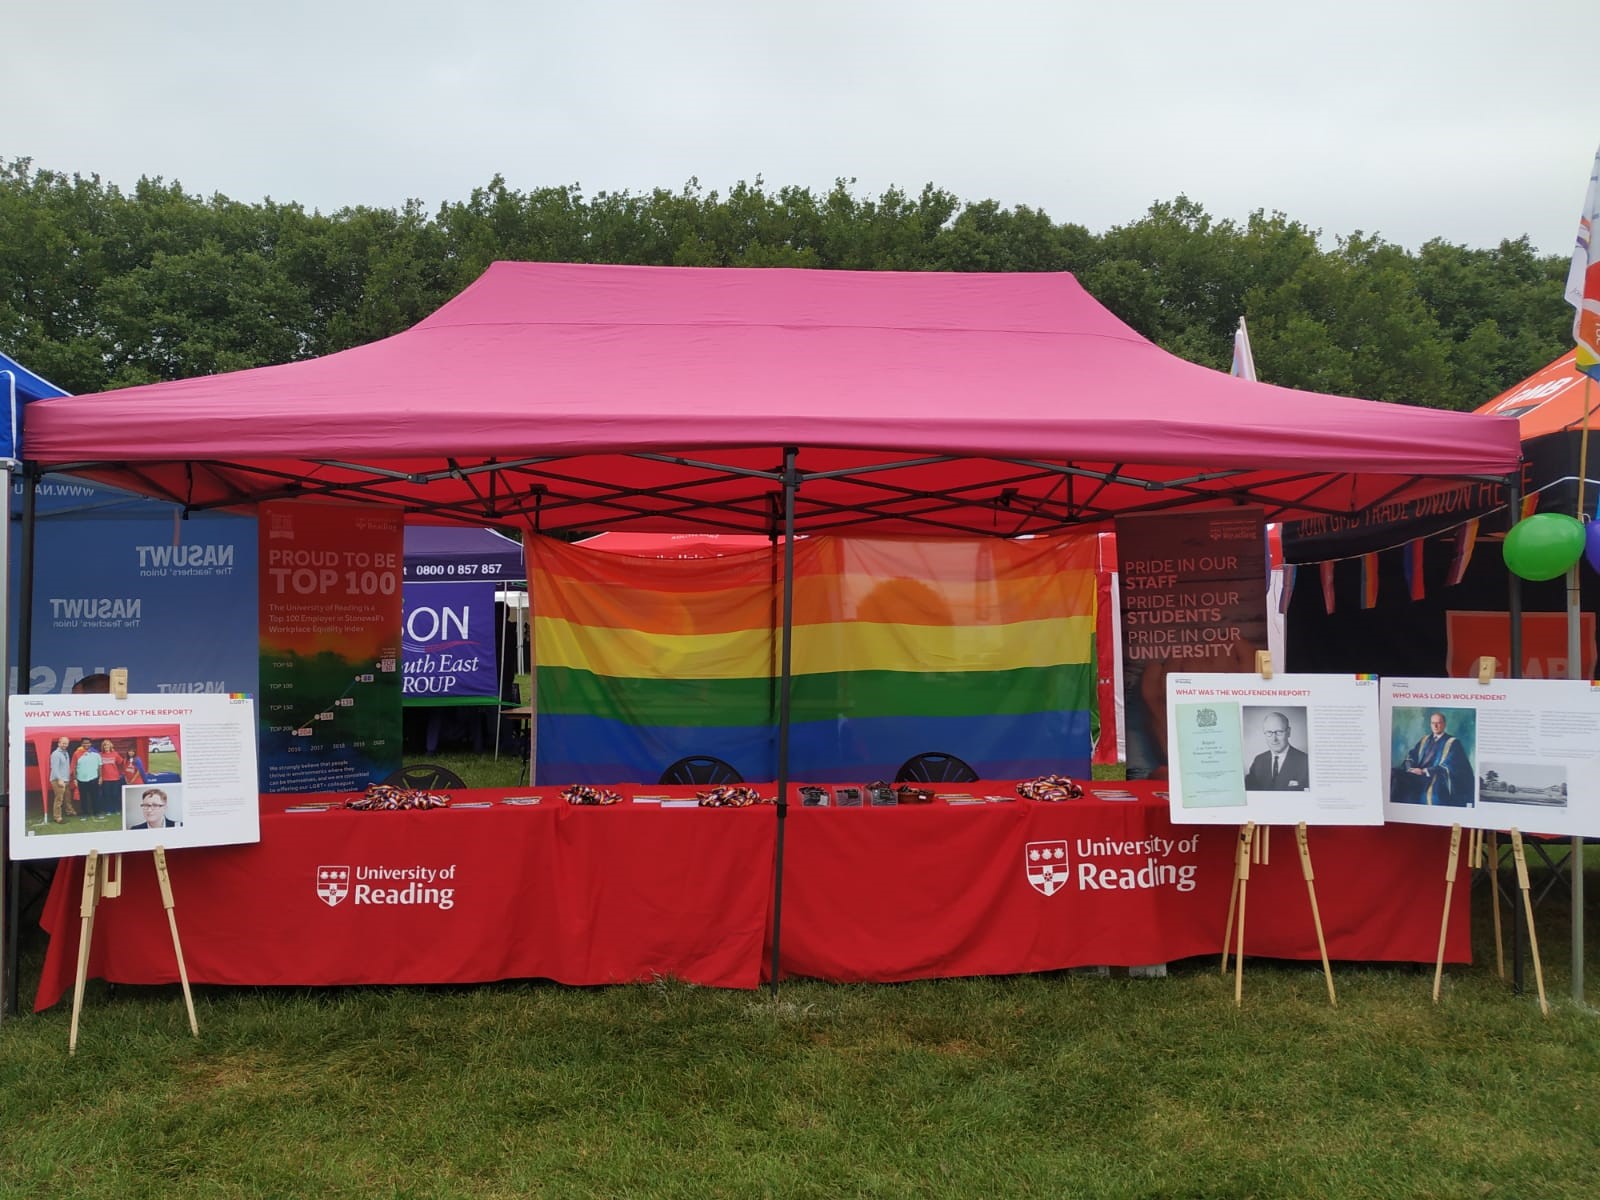 The University's Stand at the Love Unites festival set up, waiting for guests to arrive; A 6 metre by 3 metre Gazebo with a hot pink covering. Two large tables are under the gazebo, covered by the University of Reading tablecloths, in our signature red colour. A large rainbow flag hangs from the back of the Gazebo Three large signs are standing on easels in front of the stand, showing the Lord Wolfenden and the cover of his report. There is text explaining the Wolfenden legacy, and another image in modern day, showing University of Reading. The text describes the modern-day impact of the Wolfenden report on staff, students, and the wider community. 